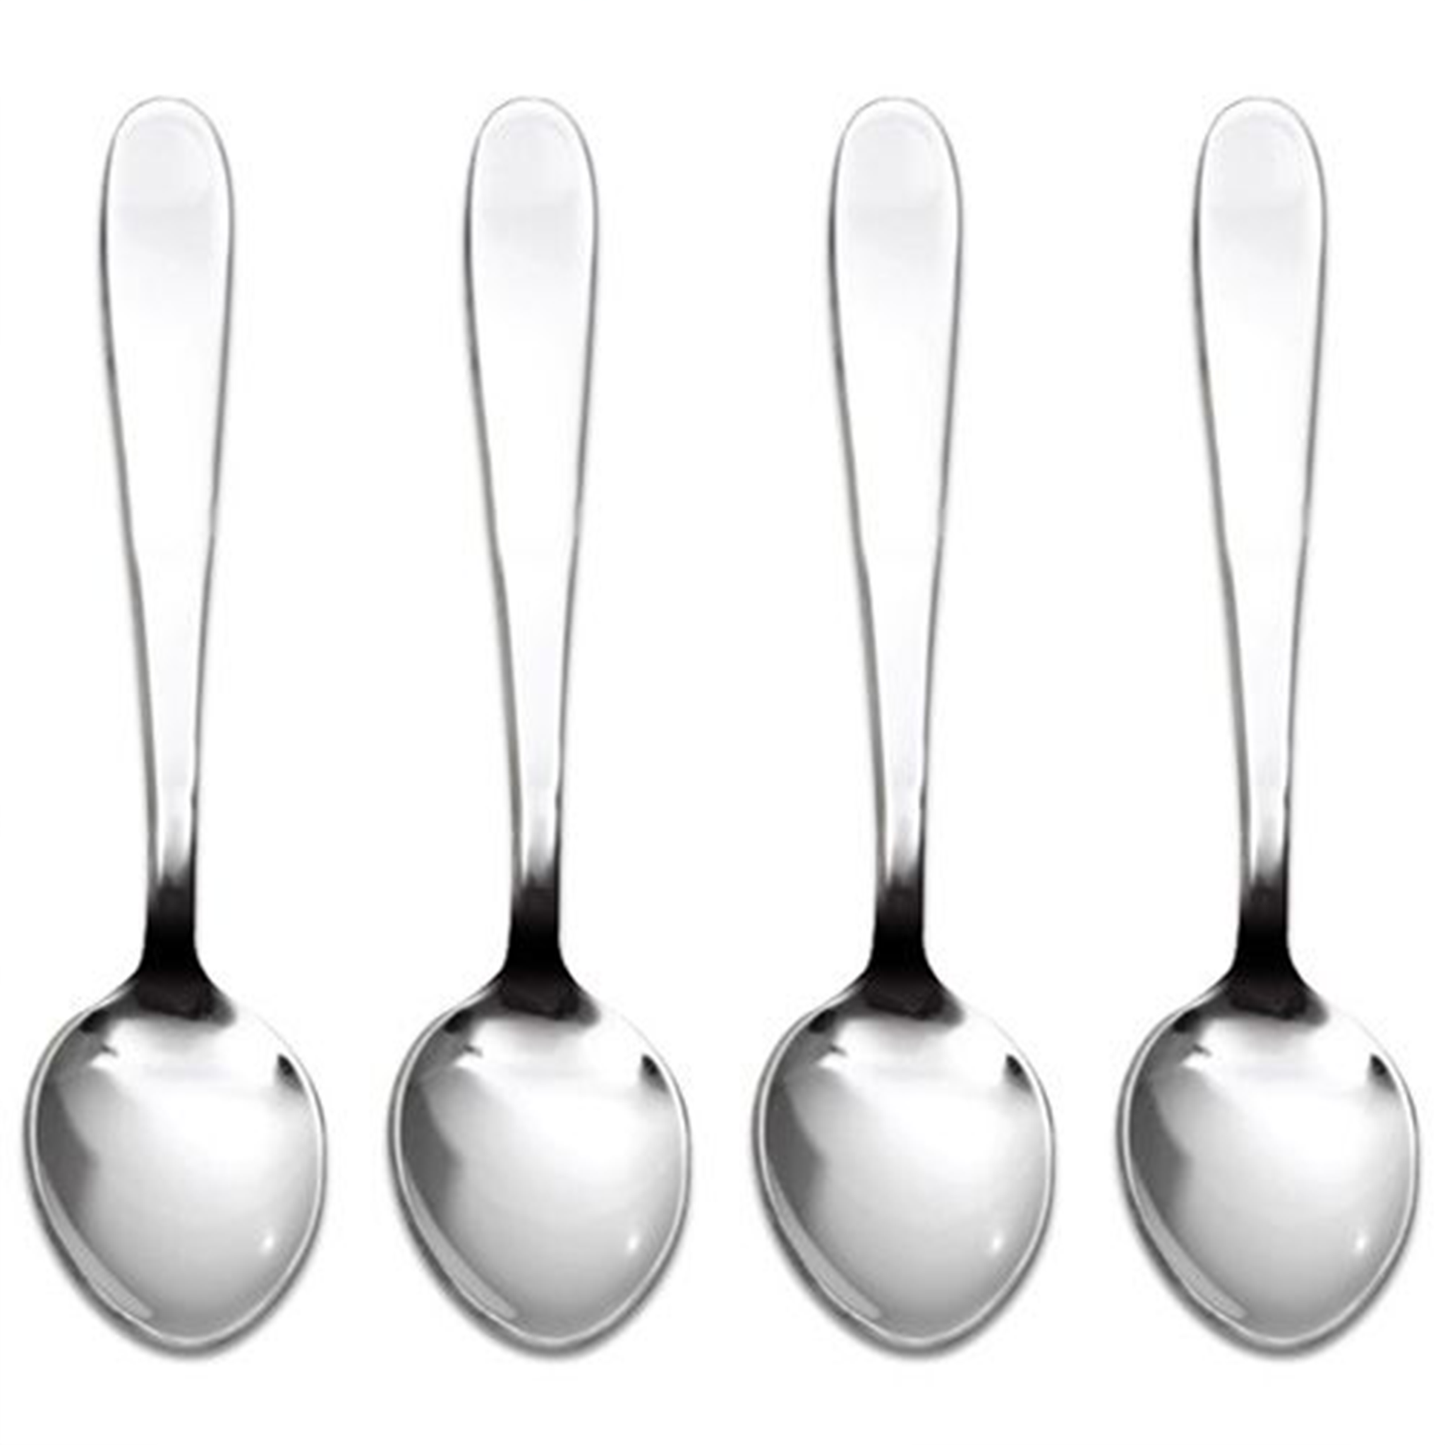 the four spoons displayed in a row